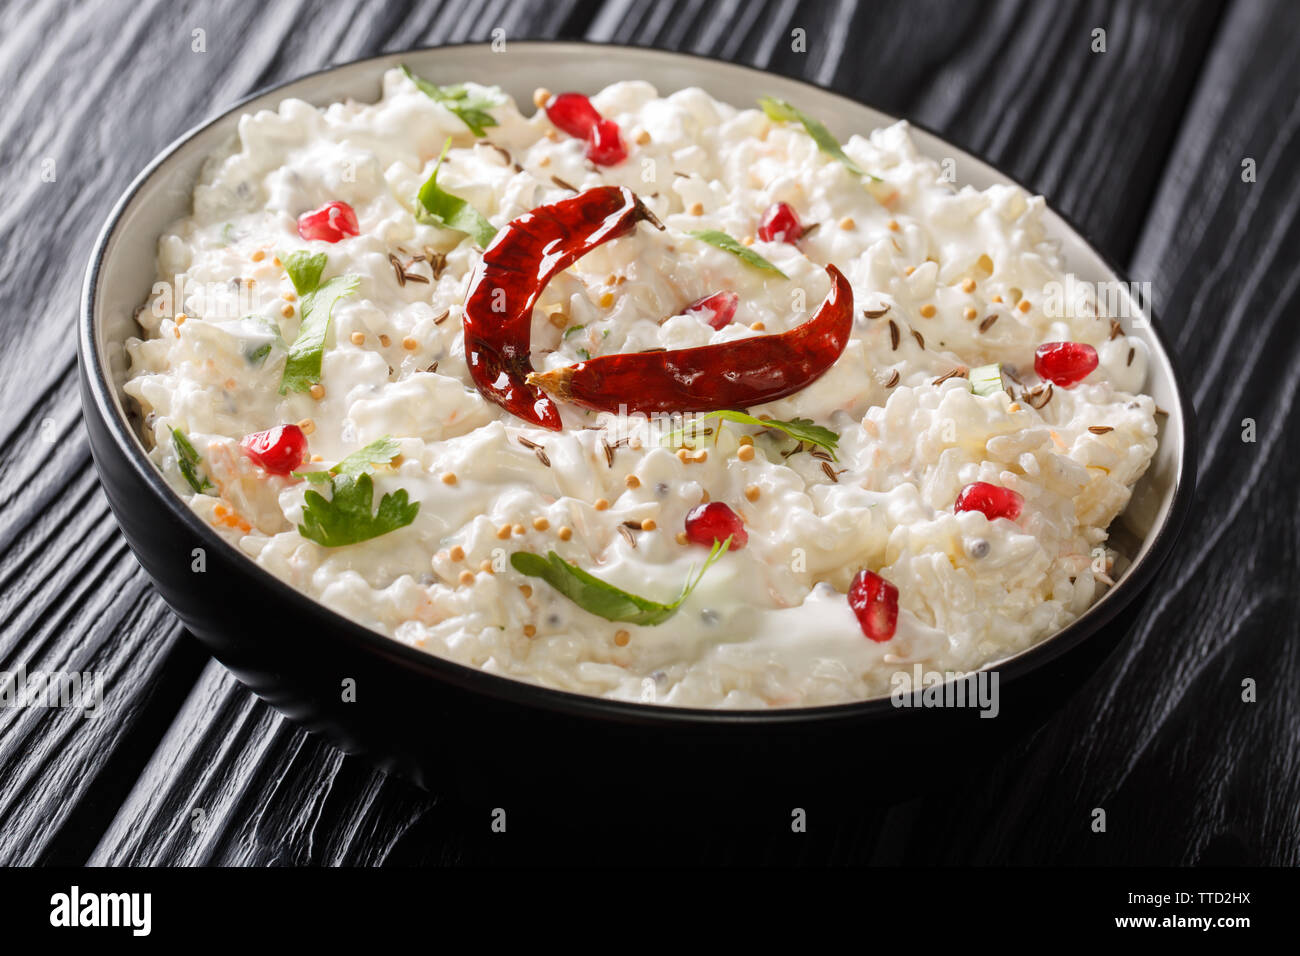 Indian Curd rice with carrots, pomegranate and with additional tempering of spices close-up in a plate on the table. horizontal Stock Photo